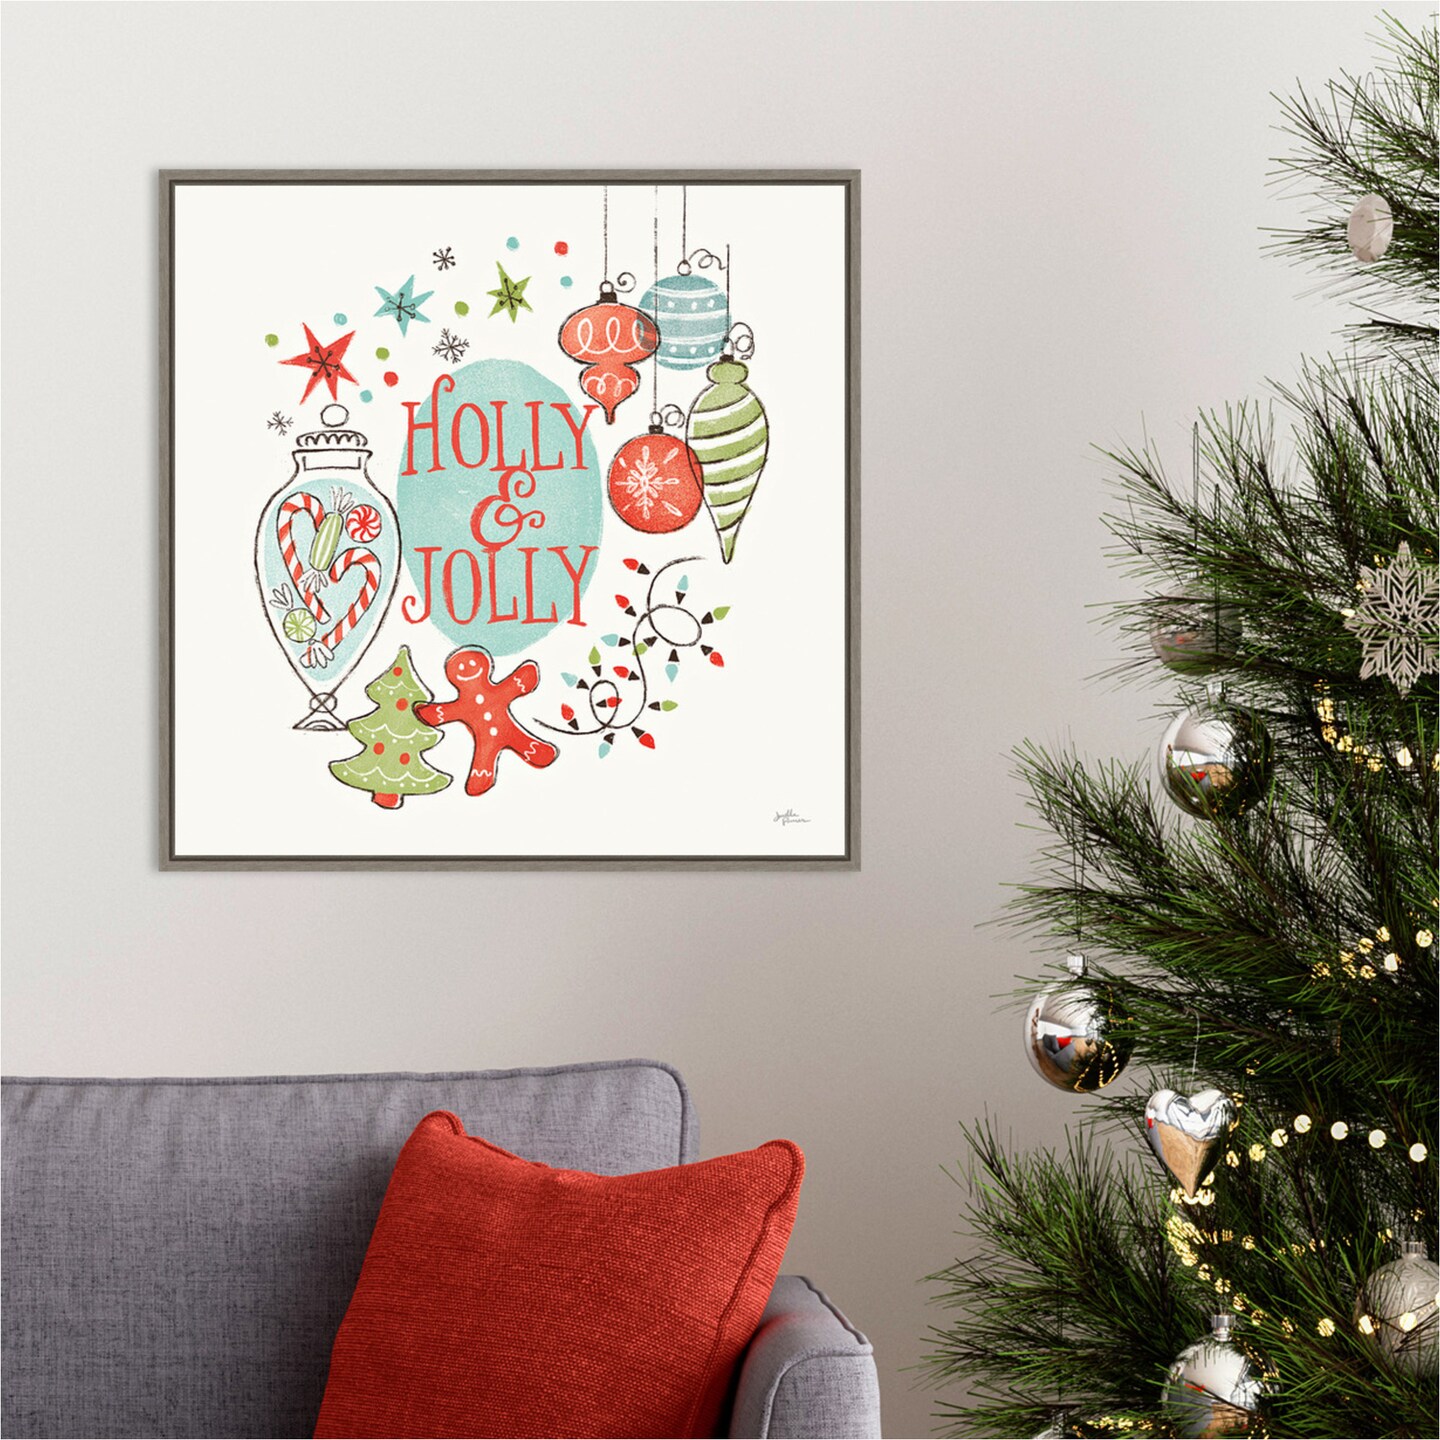 Retro Christmas IV by Janelle Penner 22-in. W x 22-in. H. Canvas Wall Art Print Framed in Grey